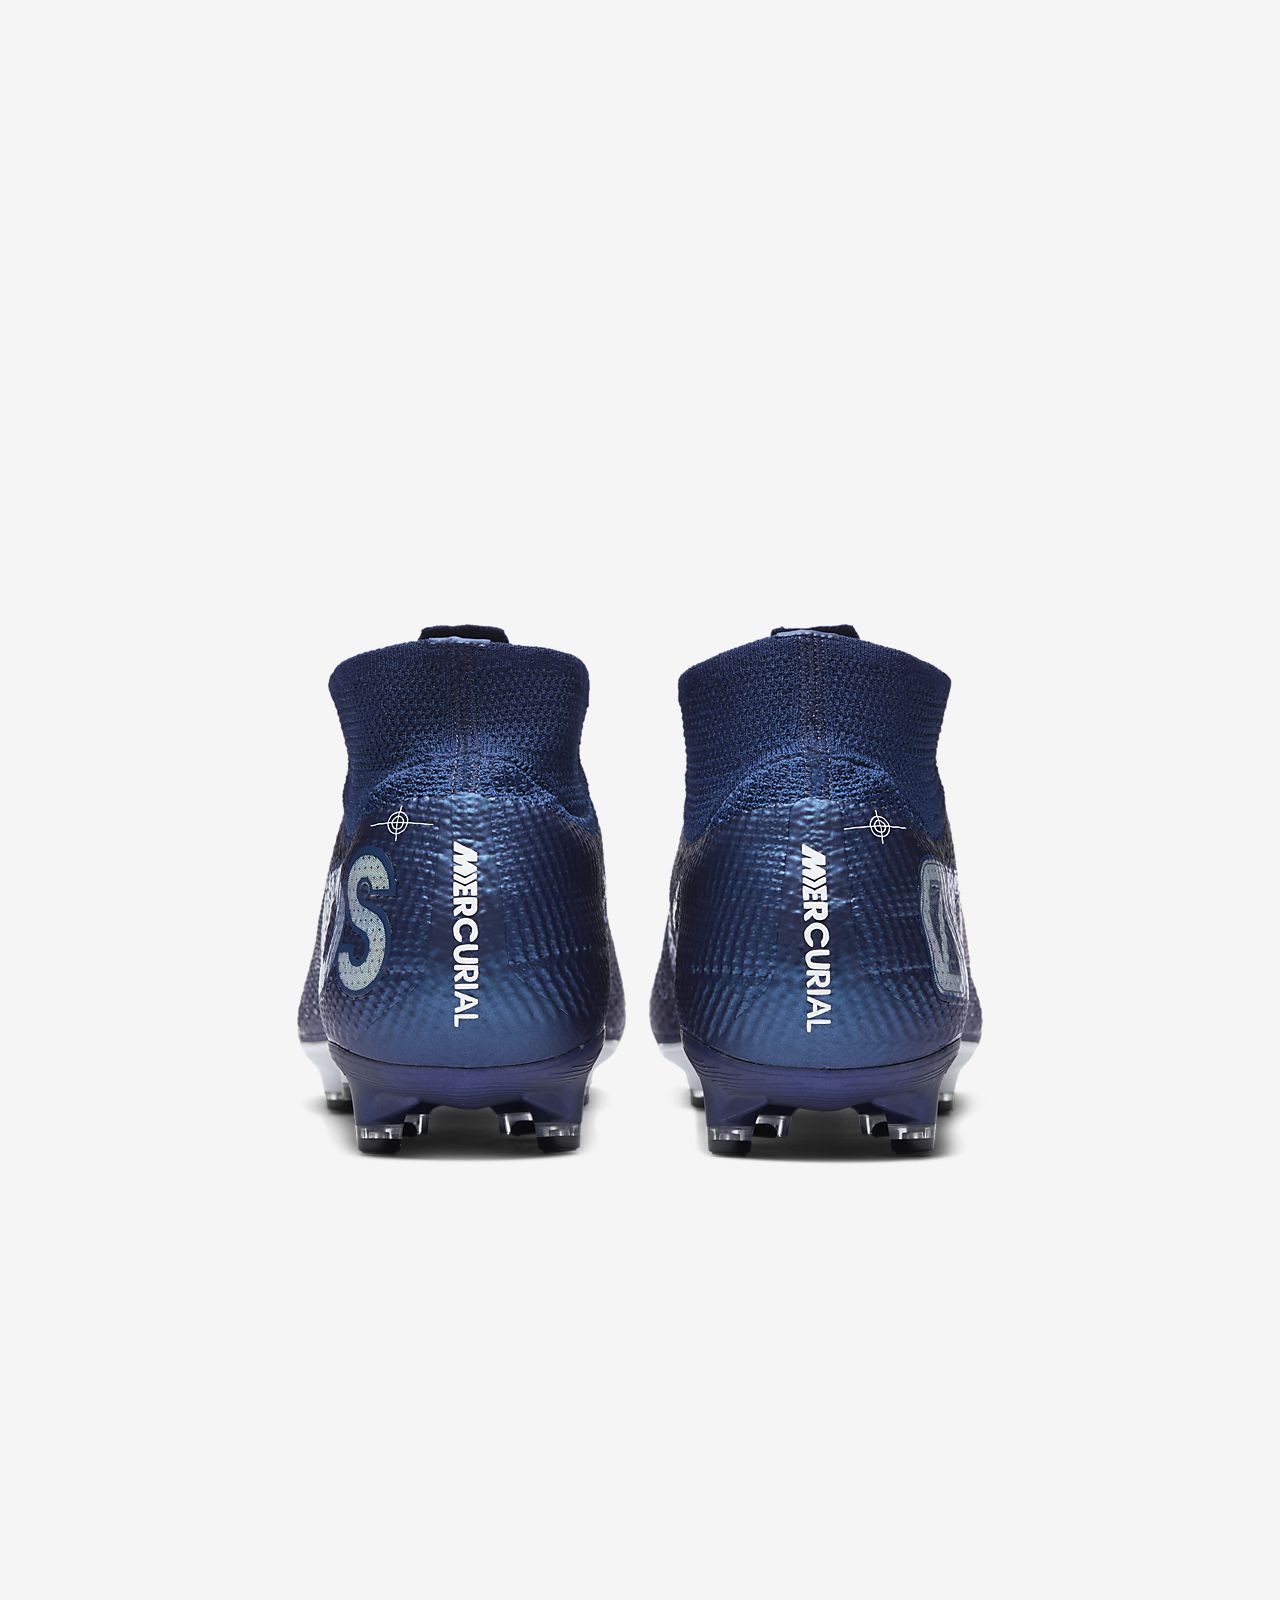 Nike Mercurial Superfly VI Elite AG Pro Mens Boots Artificial.